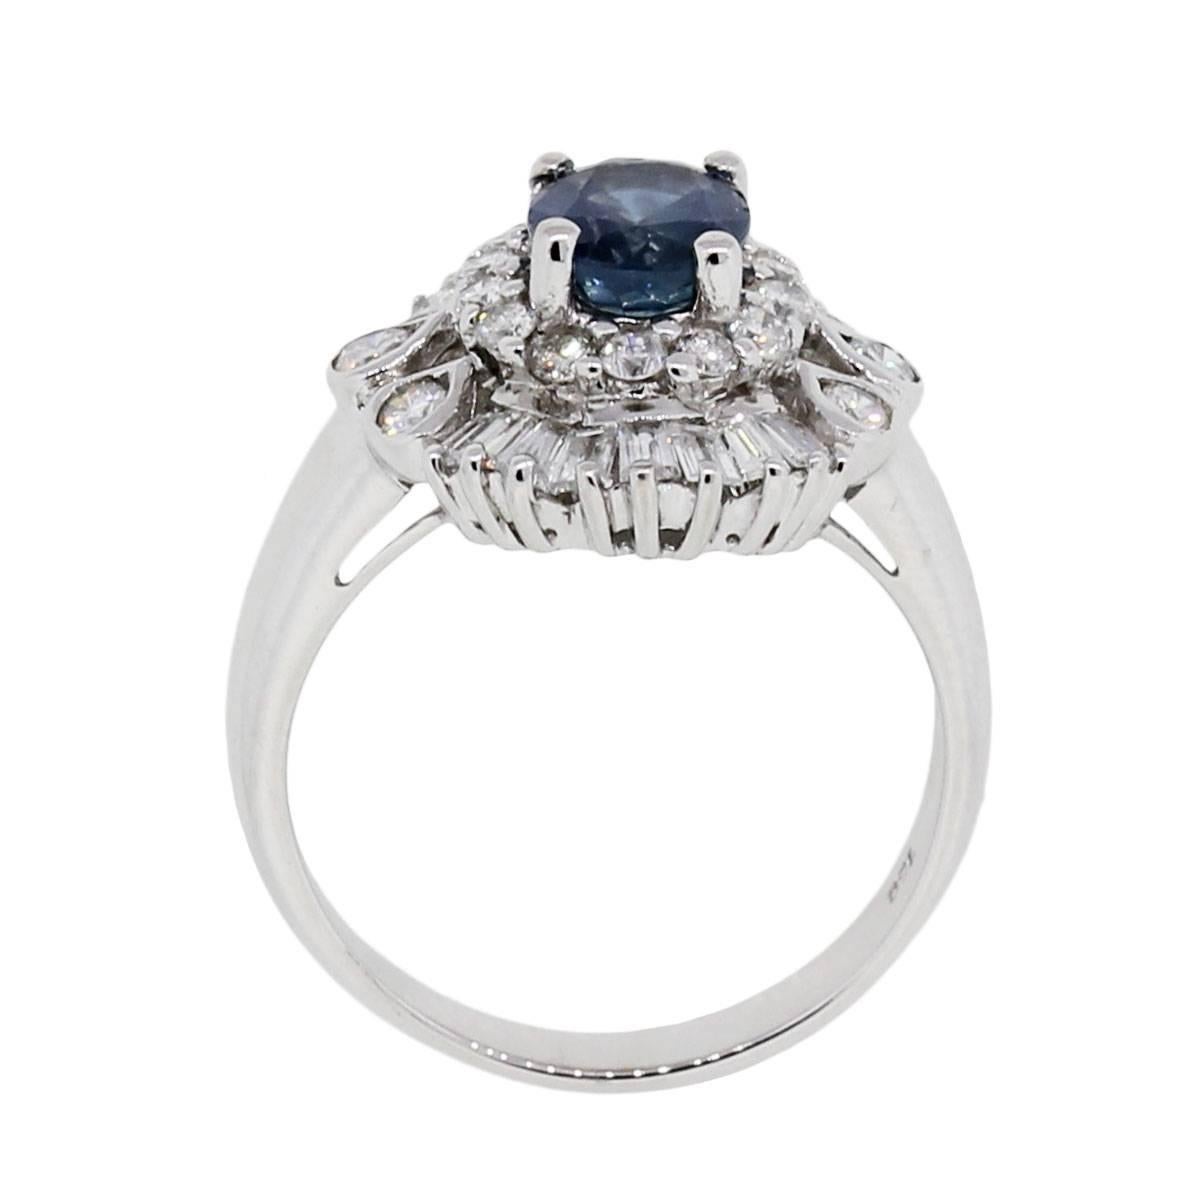 Material: 18k white gold
Diamond Details: Approximately 1.5ctw of baguette shape diamonds and round brilliant diamonds. Diamonds are G/H in color and SI in clarity
Gemstone Details: Oval shape Sapphire measuring approximately 7.61mm x 5.98mm
Ring